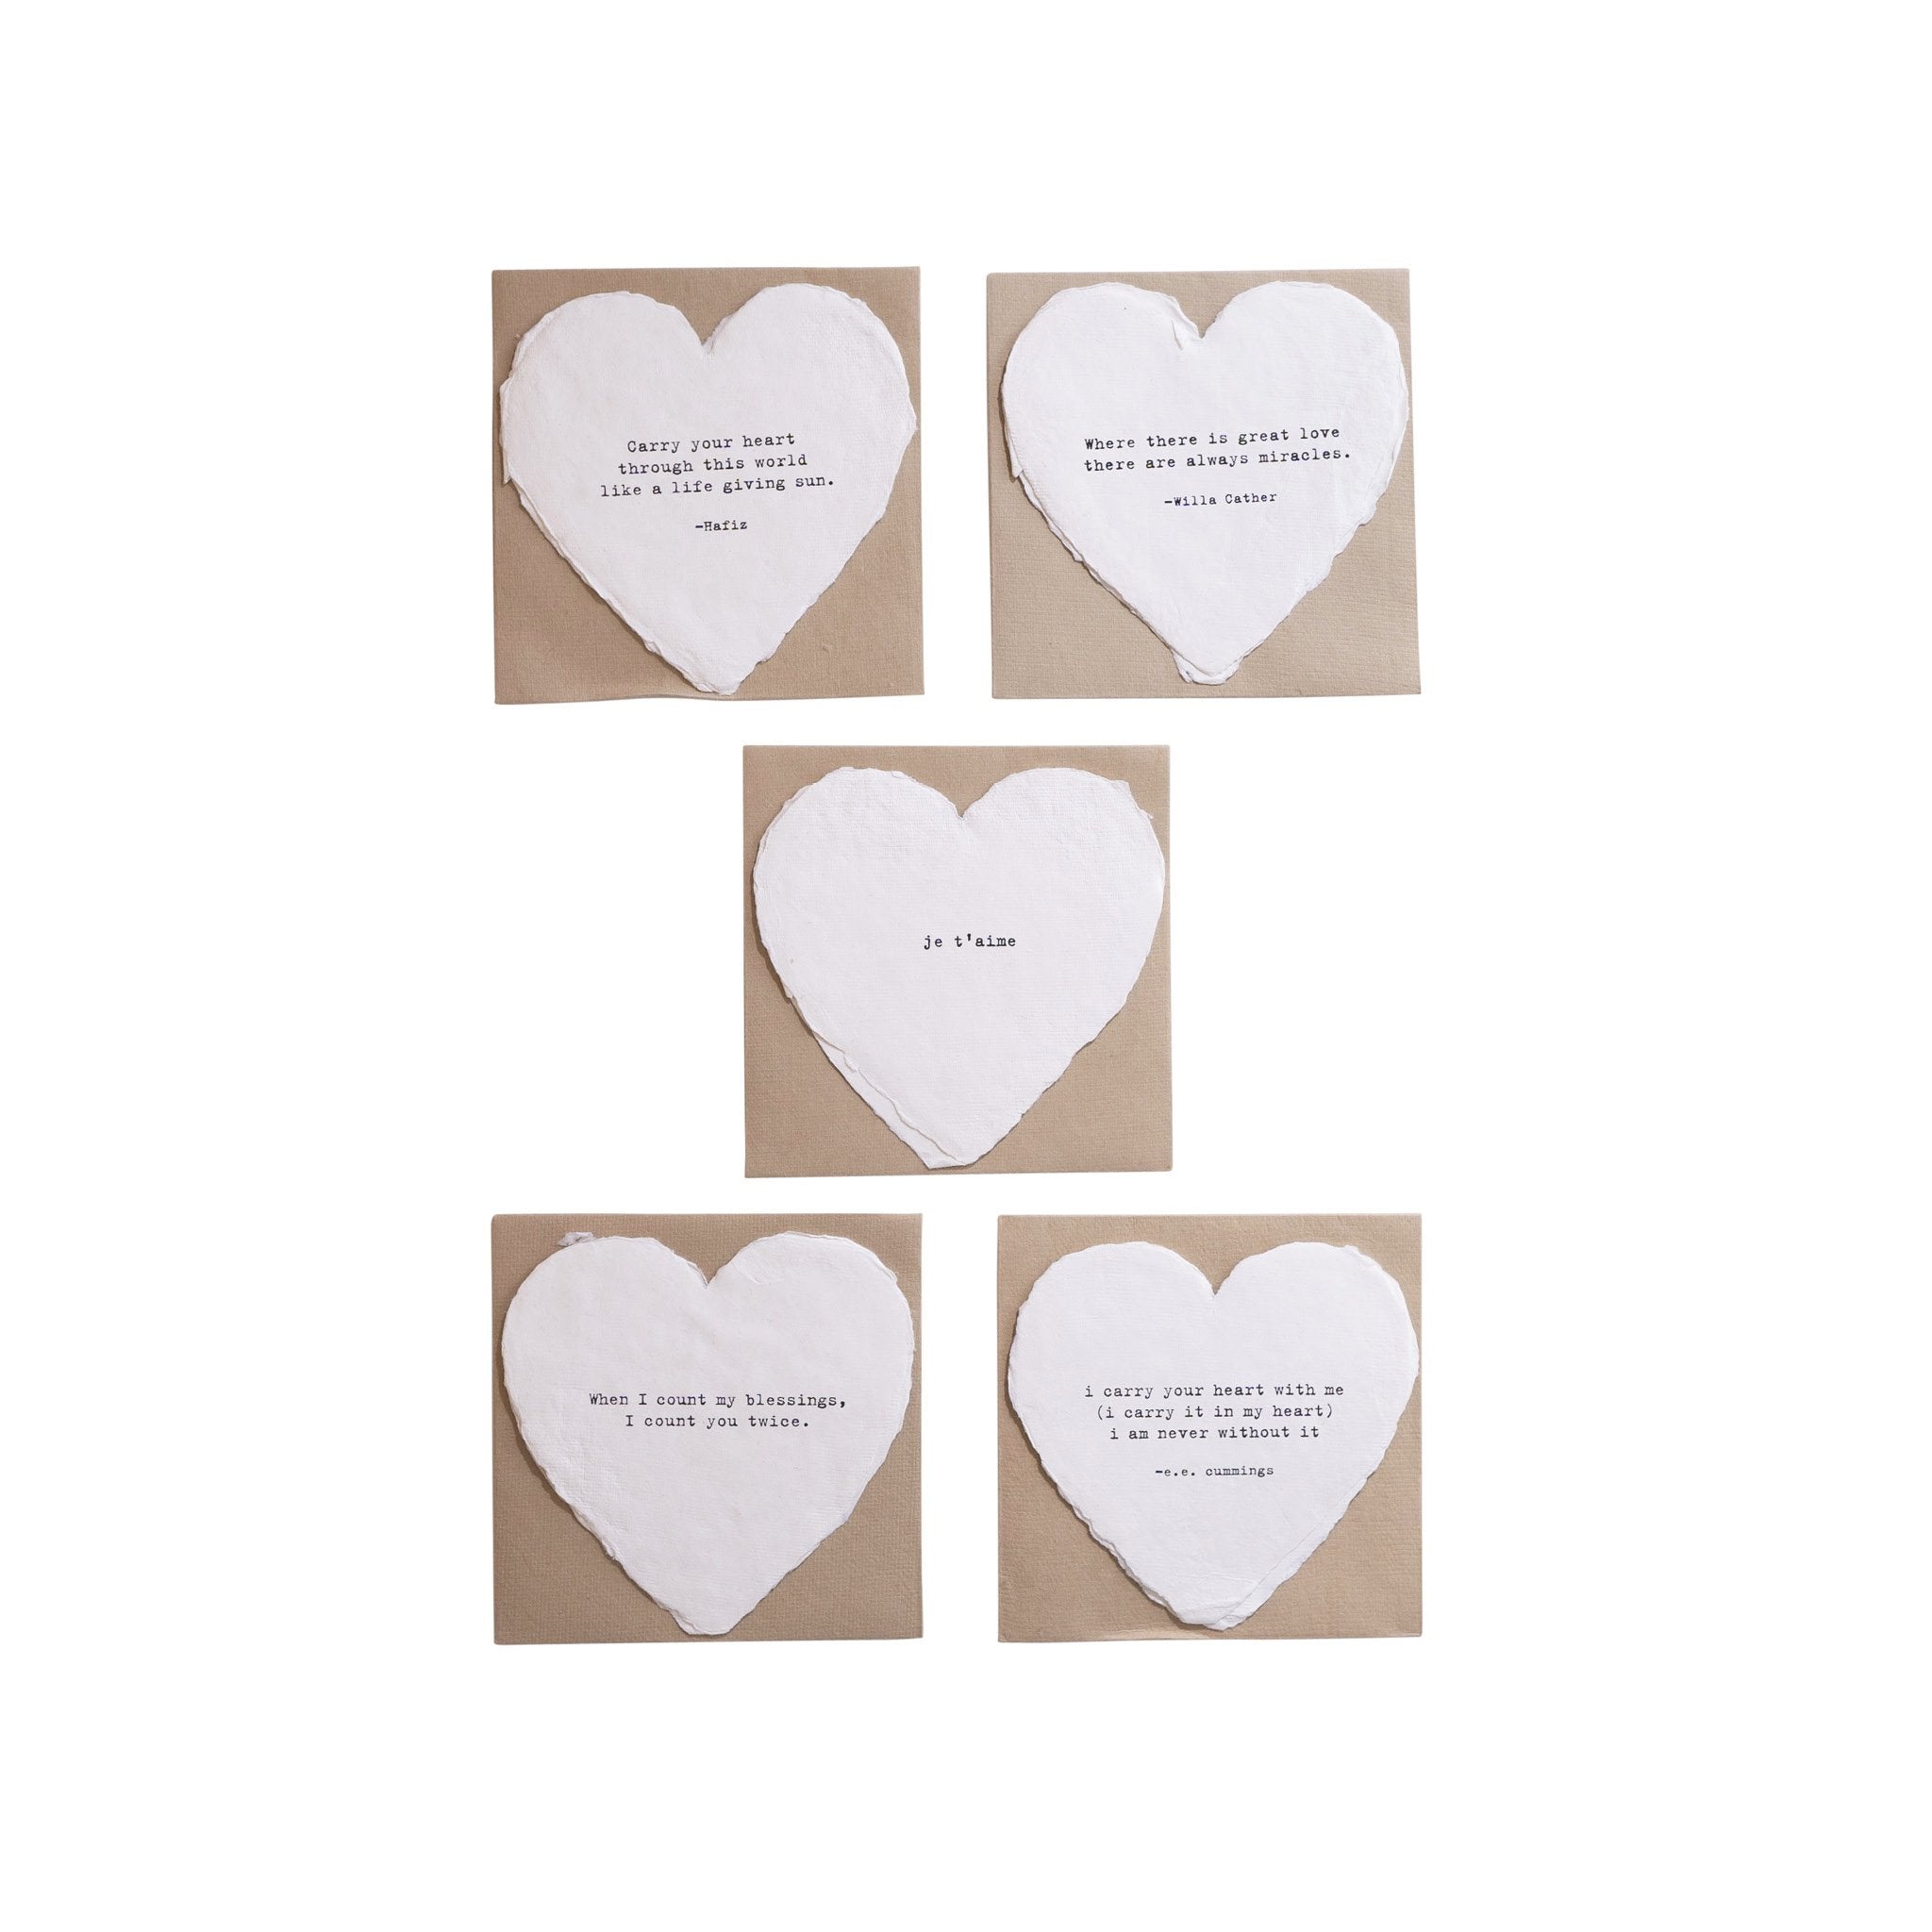 Deckled Heart Cards - Printed on deckled handmade paper, these charming enclosure cards feature sentimental quotes.